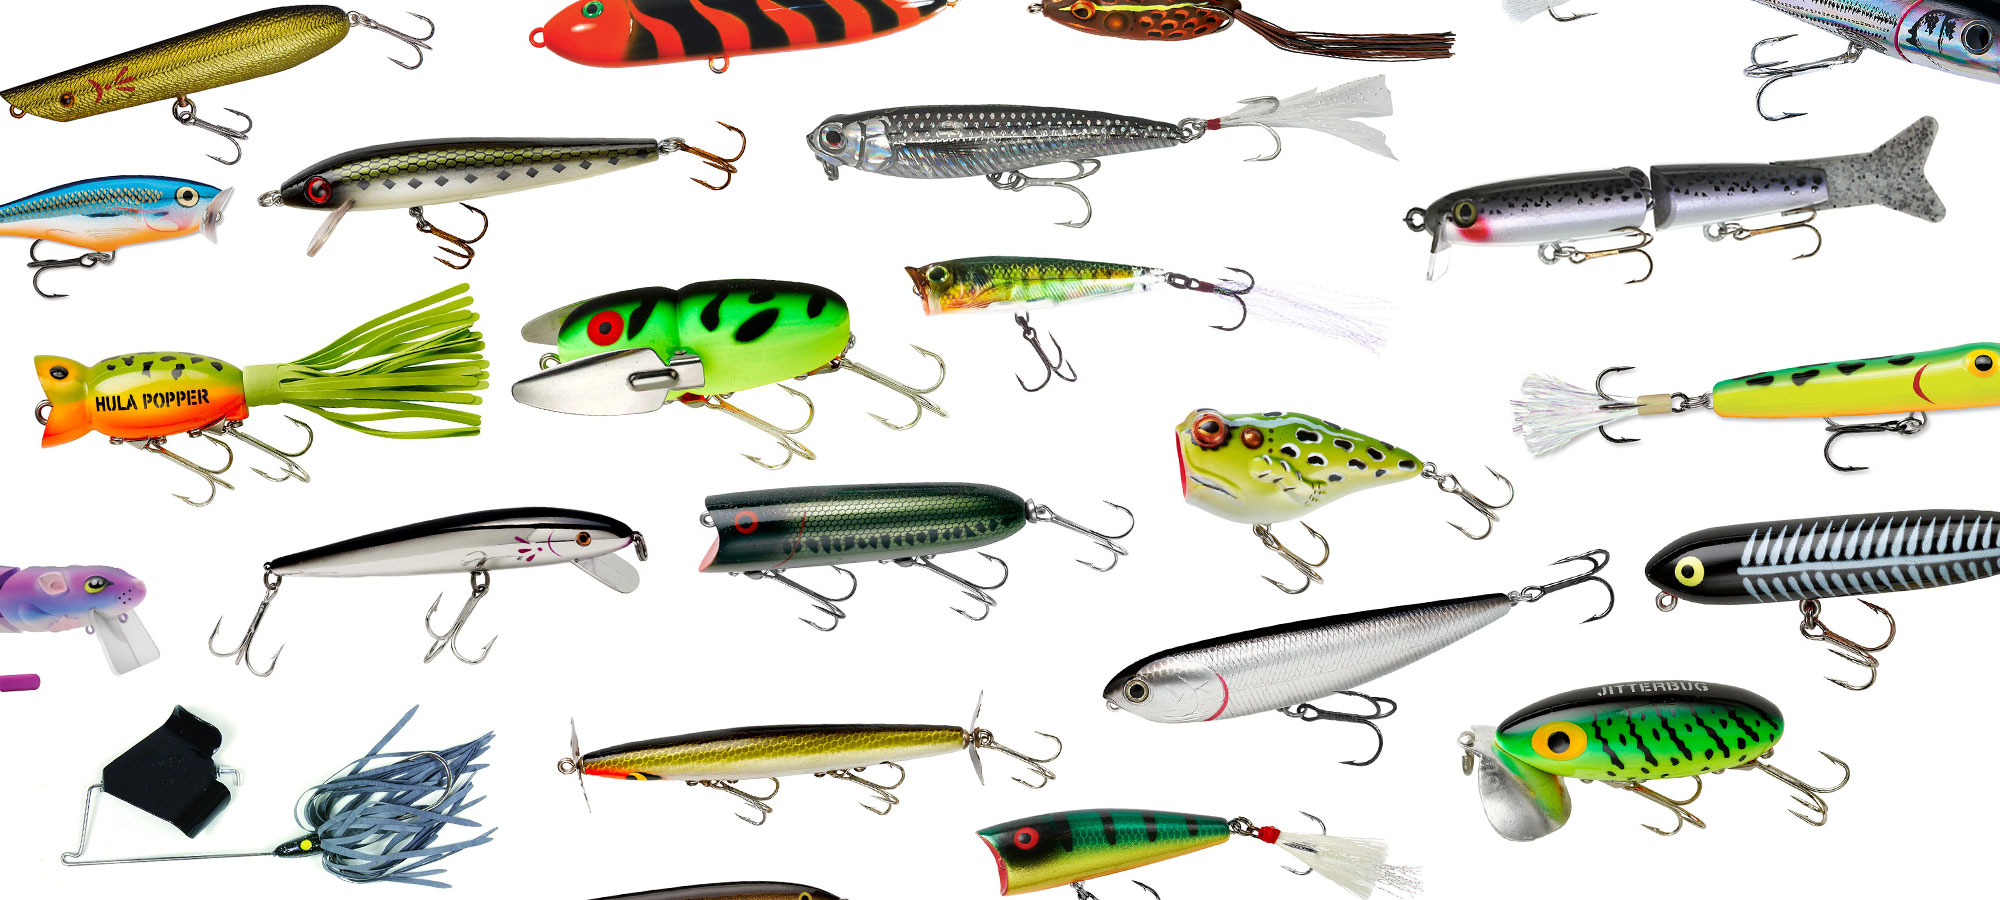 collage of topwater fishing lures